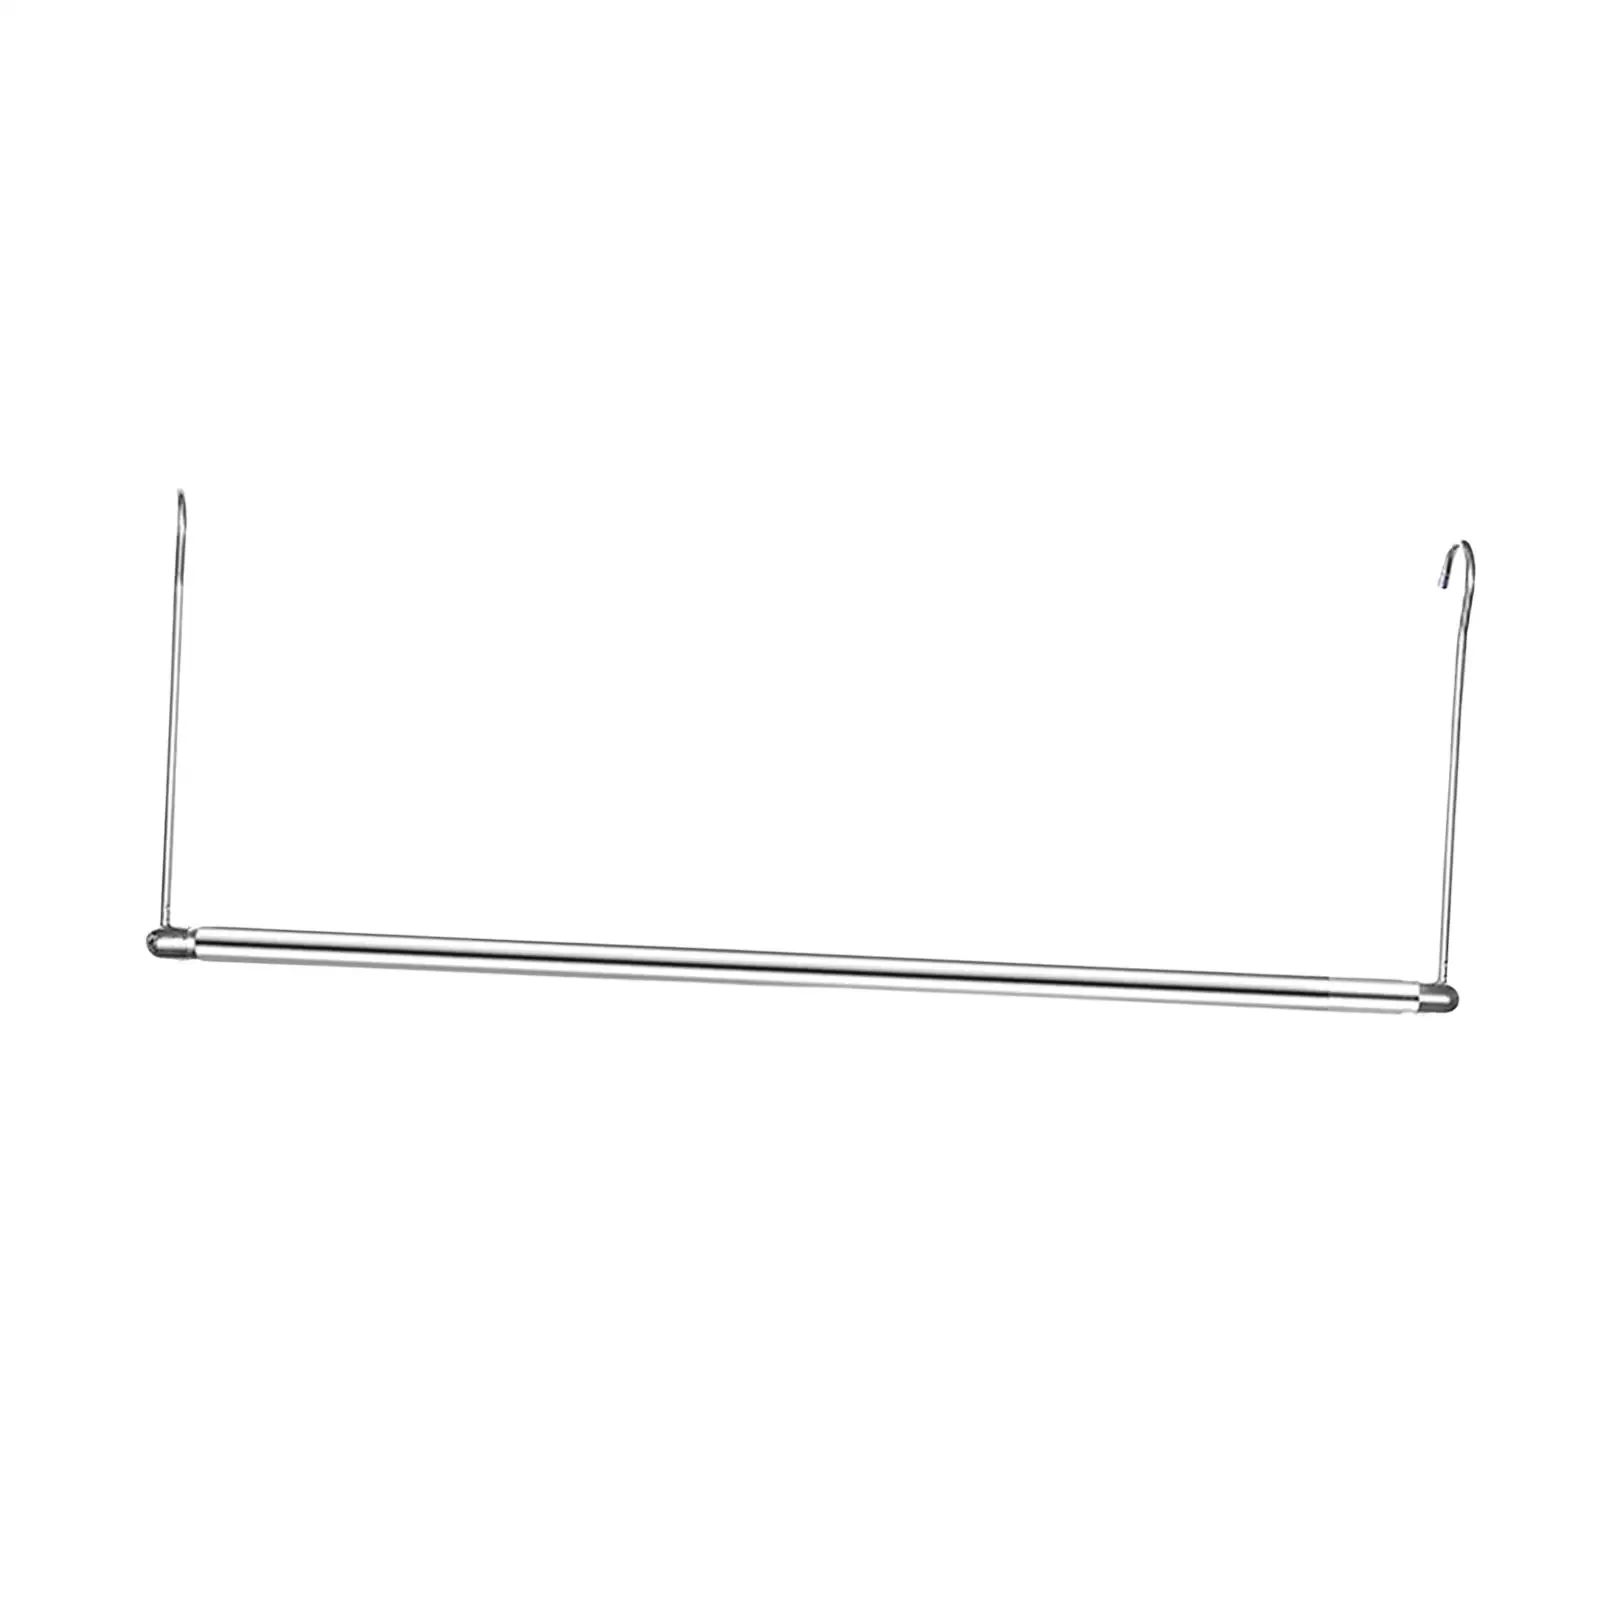 Telescopic Clothing Rod Clothes Drying Rack with Hooks for Laundry Room Home